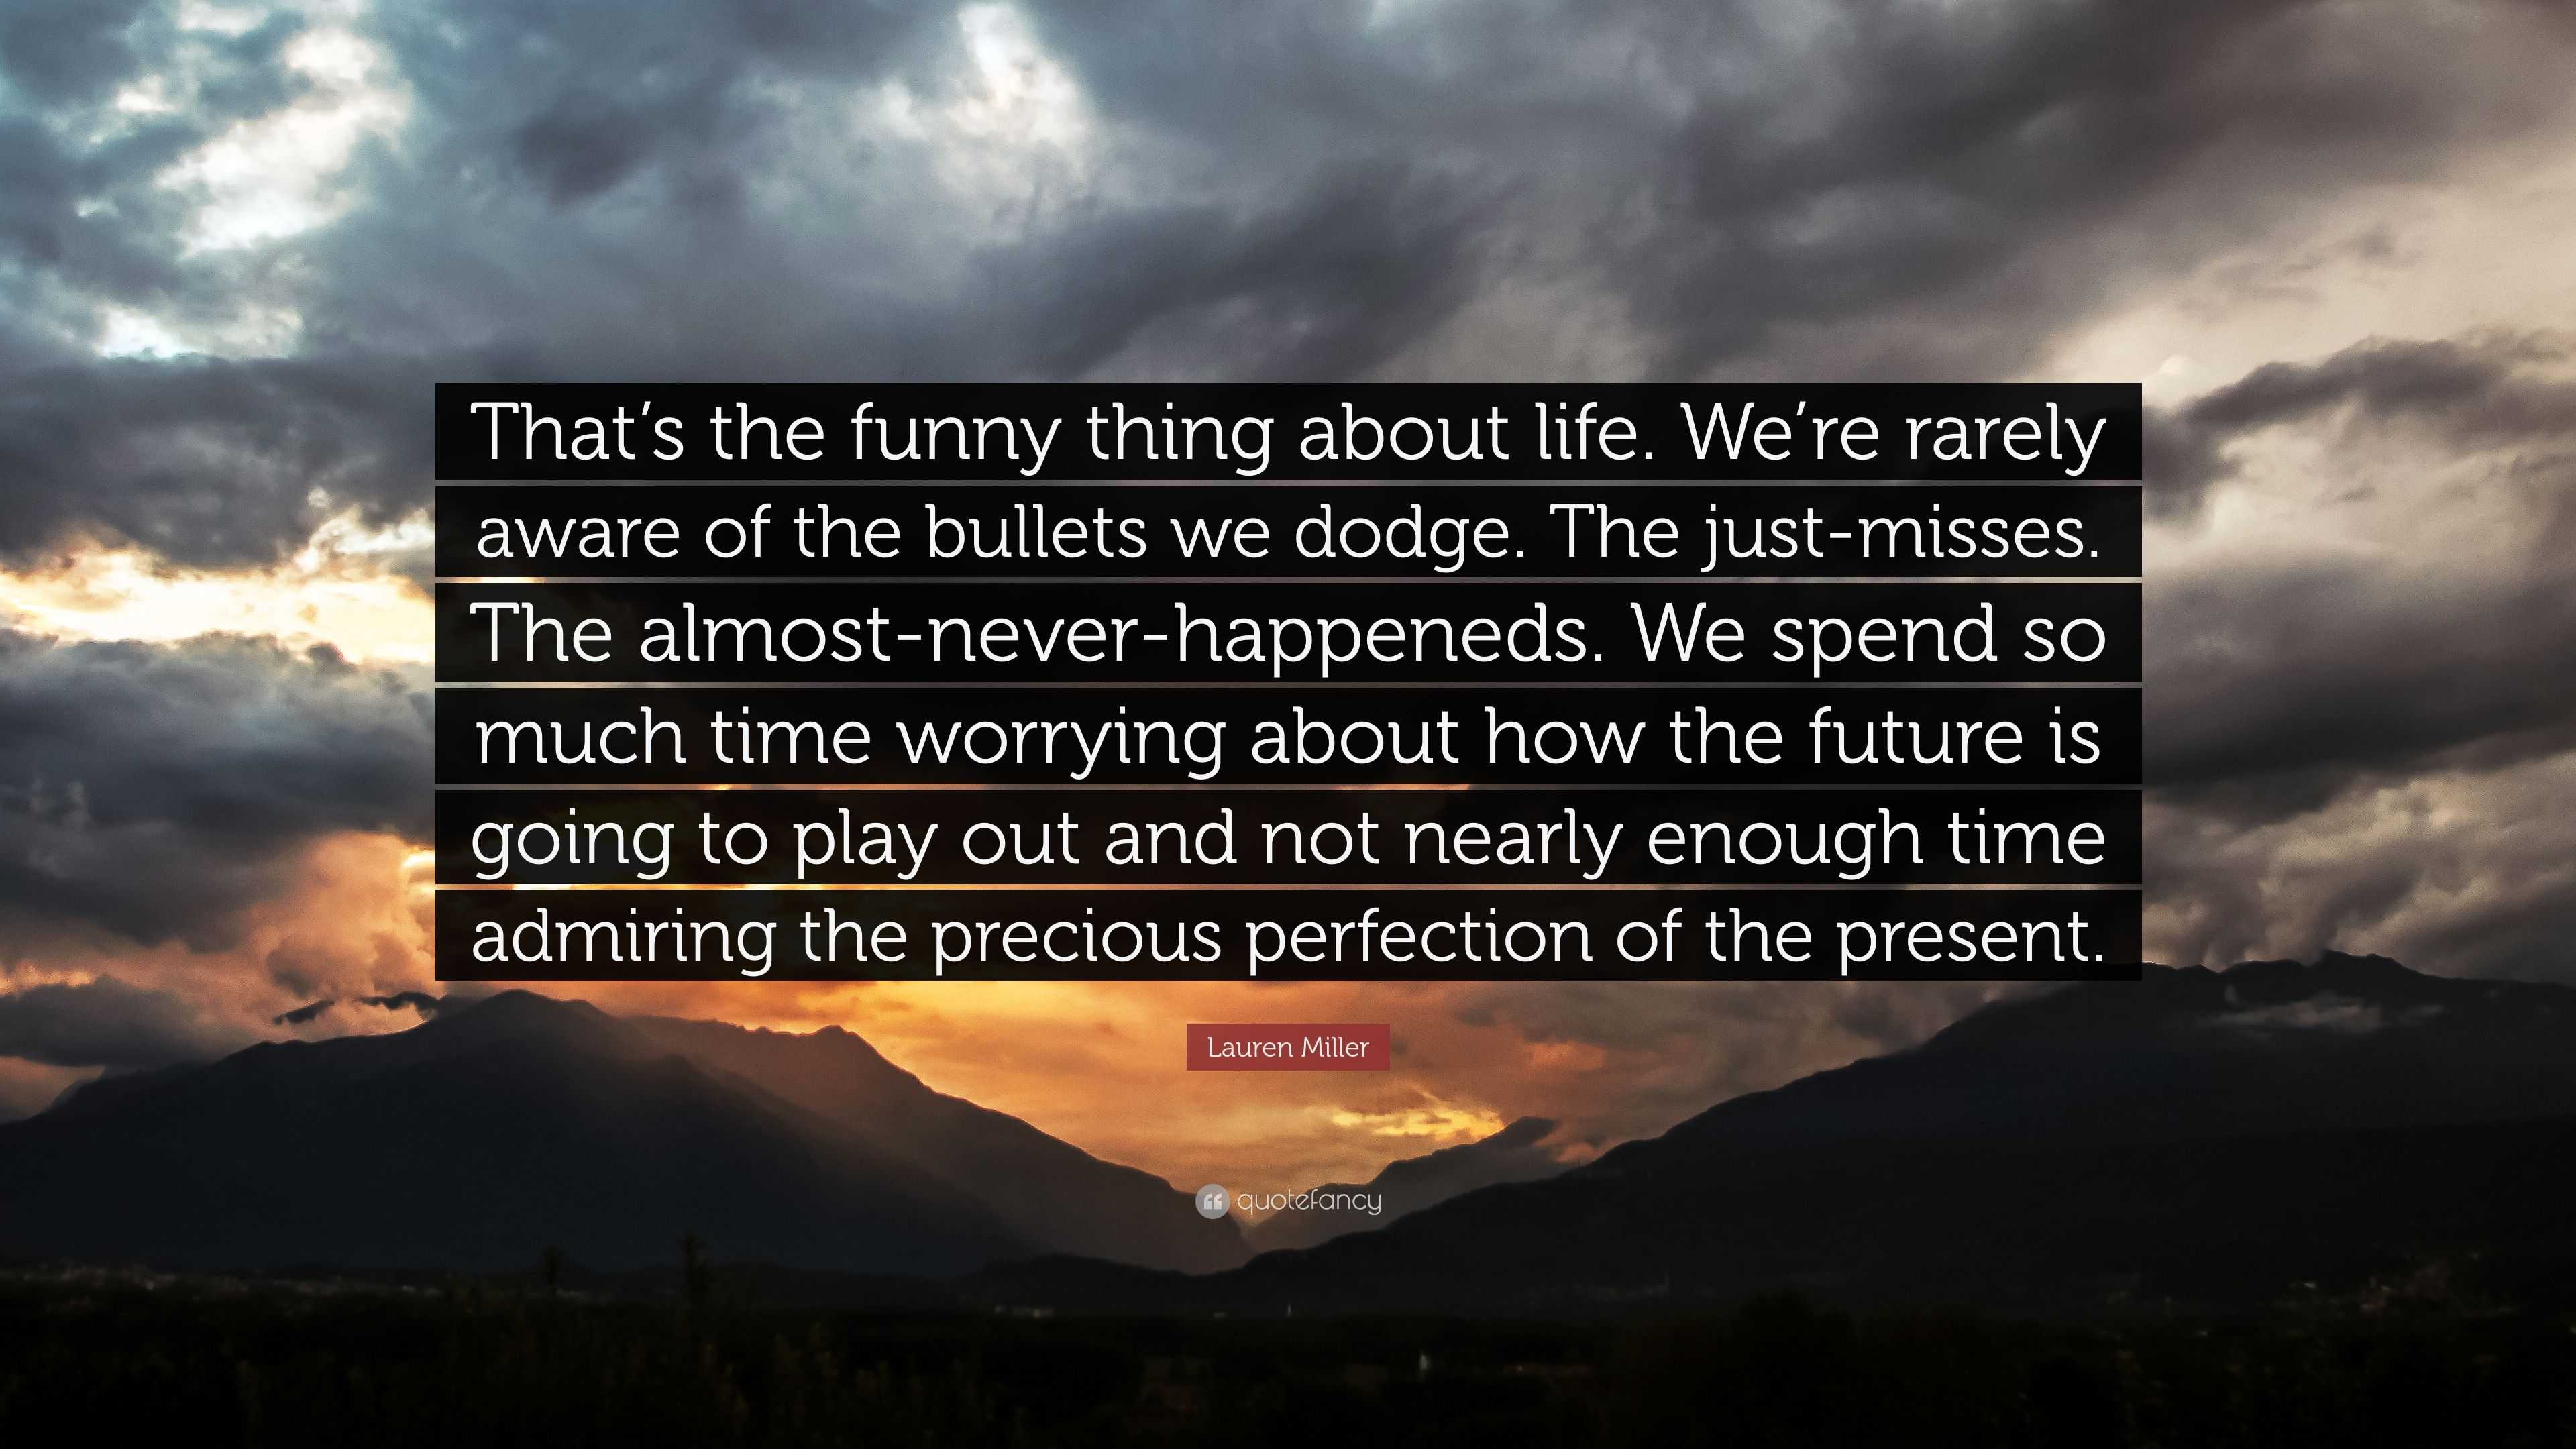 Lauren Miller Quote: “That's the funny thing about life. We're rarely aware  of the bullets we dodge. The just-misses. The almost-never-happene...”